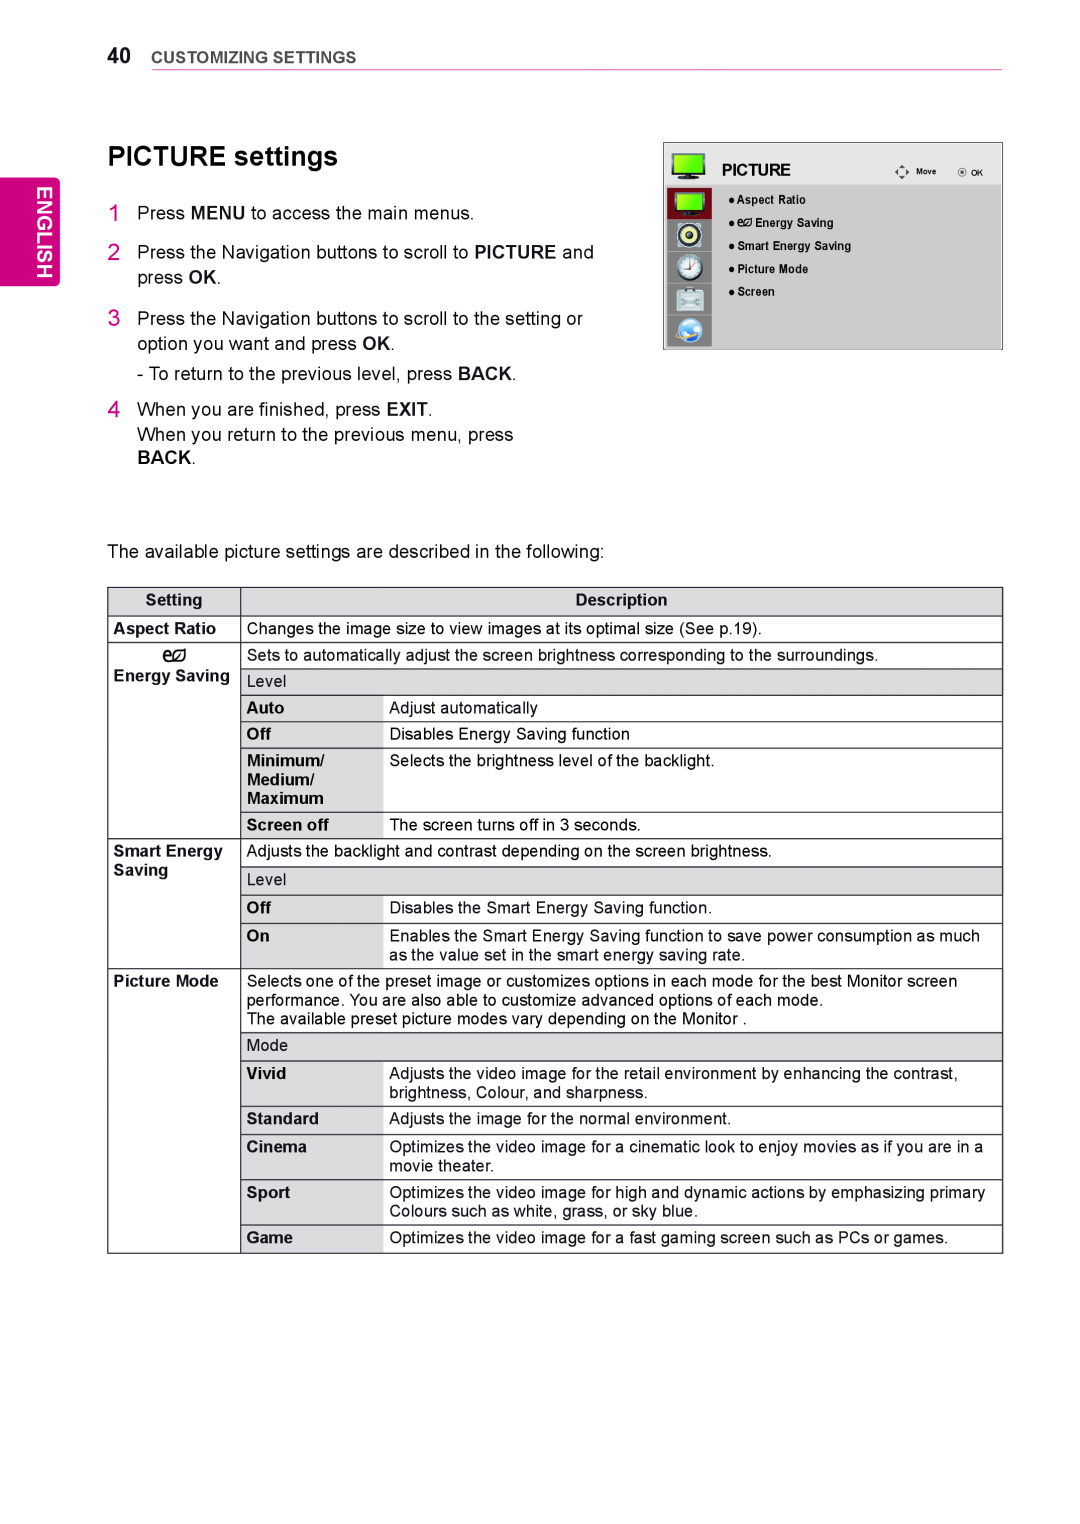 LG Electronics 47WS10, 42WS10, 55WS10 owner manual PICTURE settings, English, Customizing Settings 